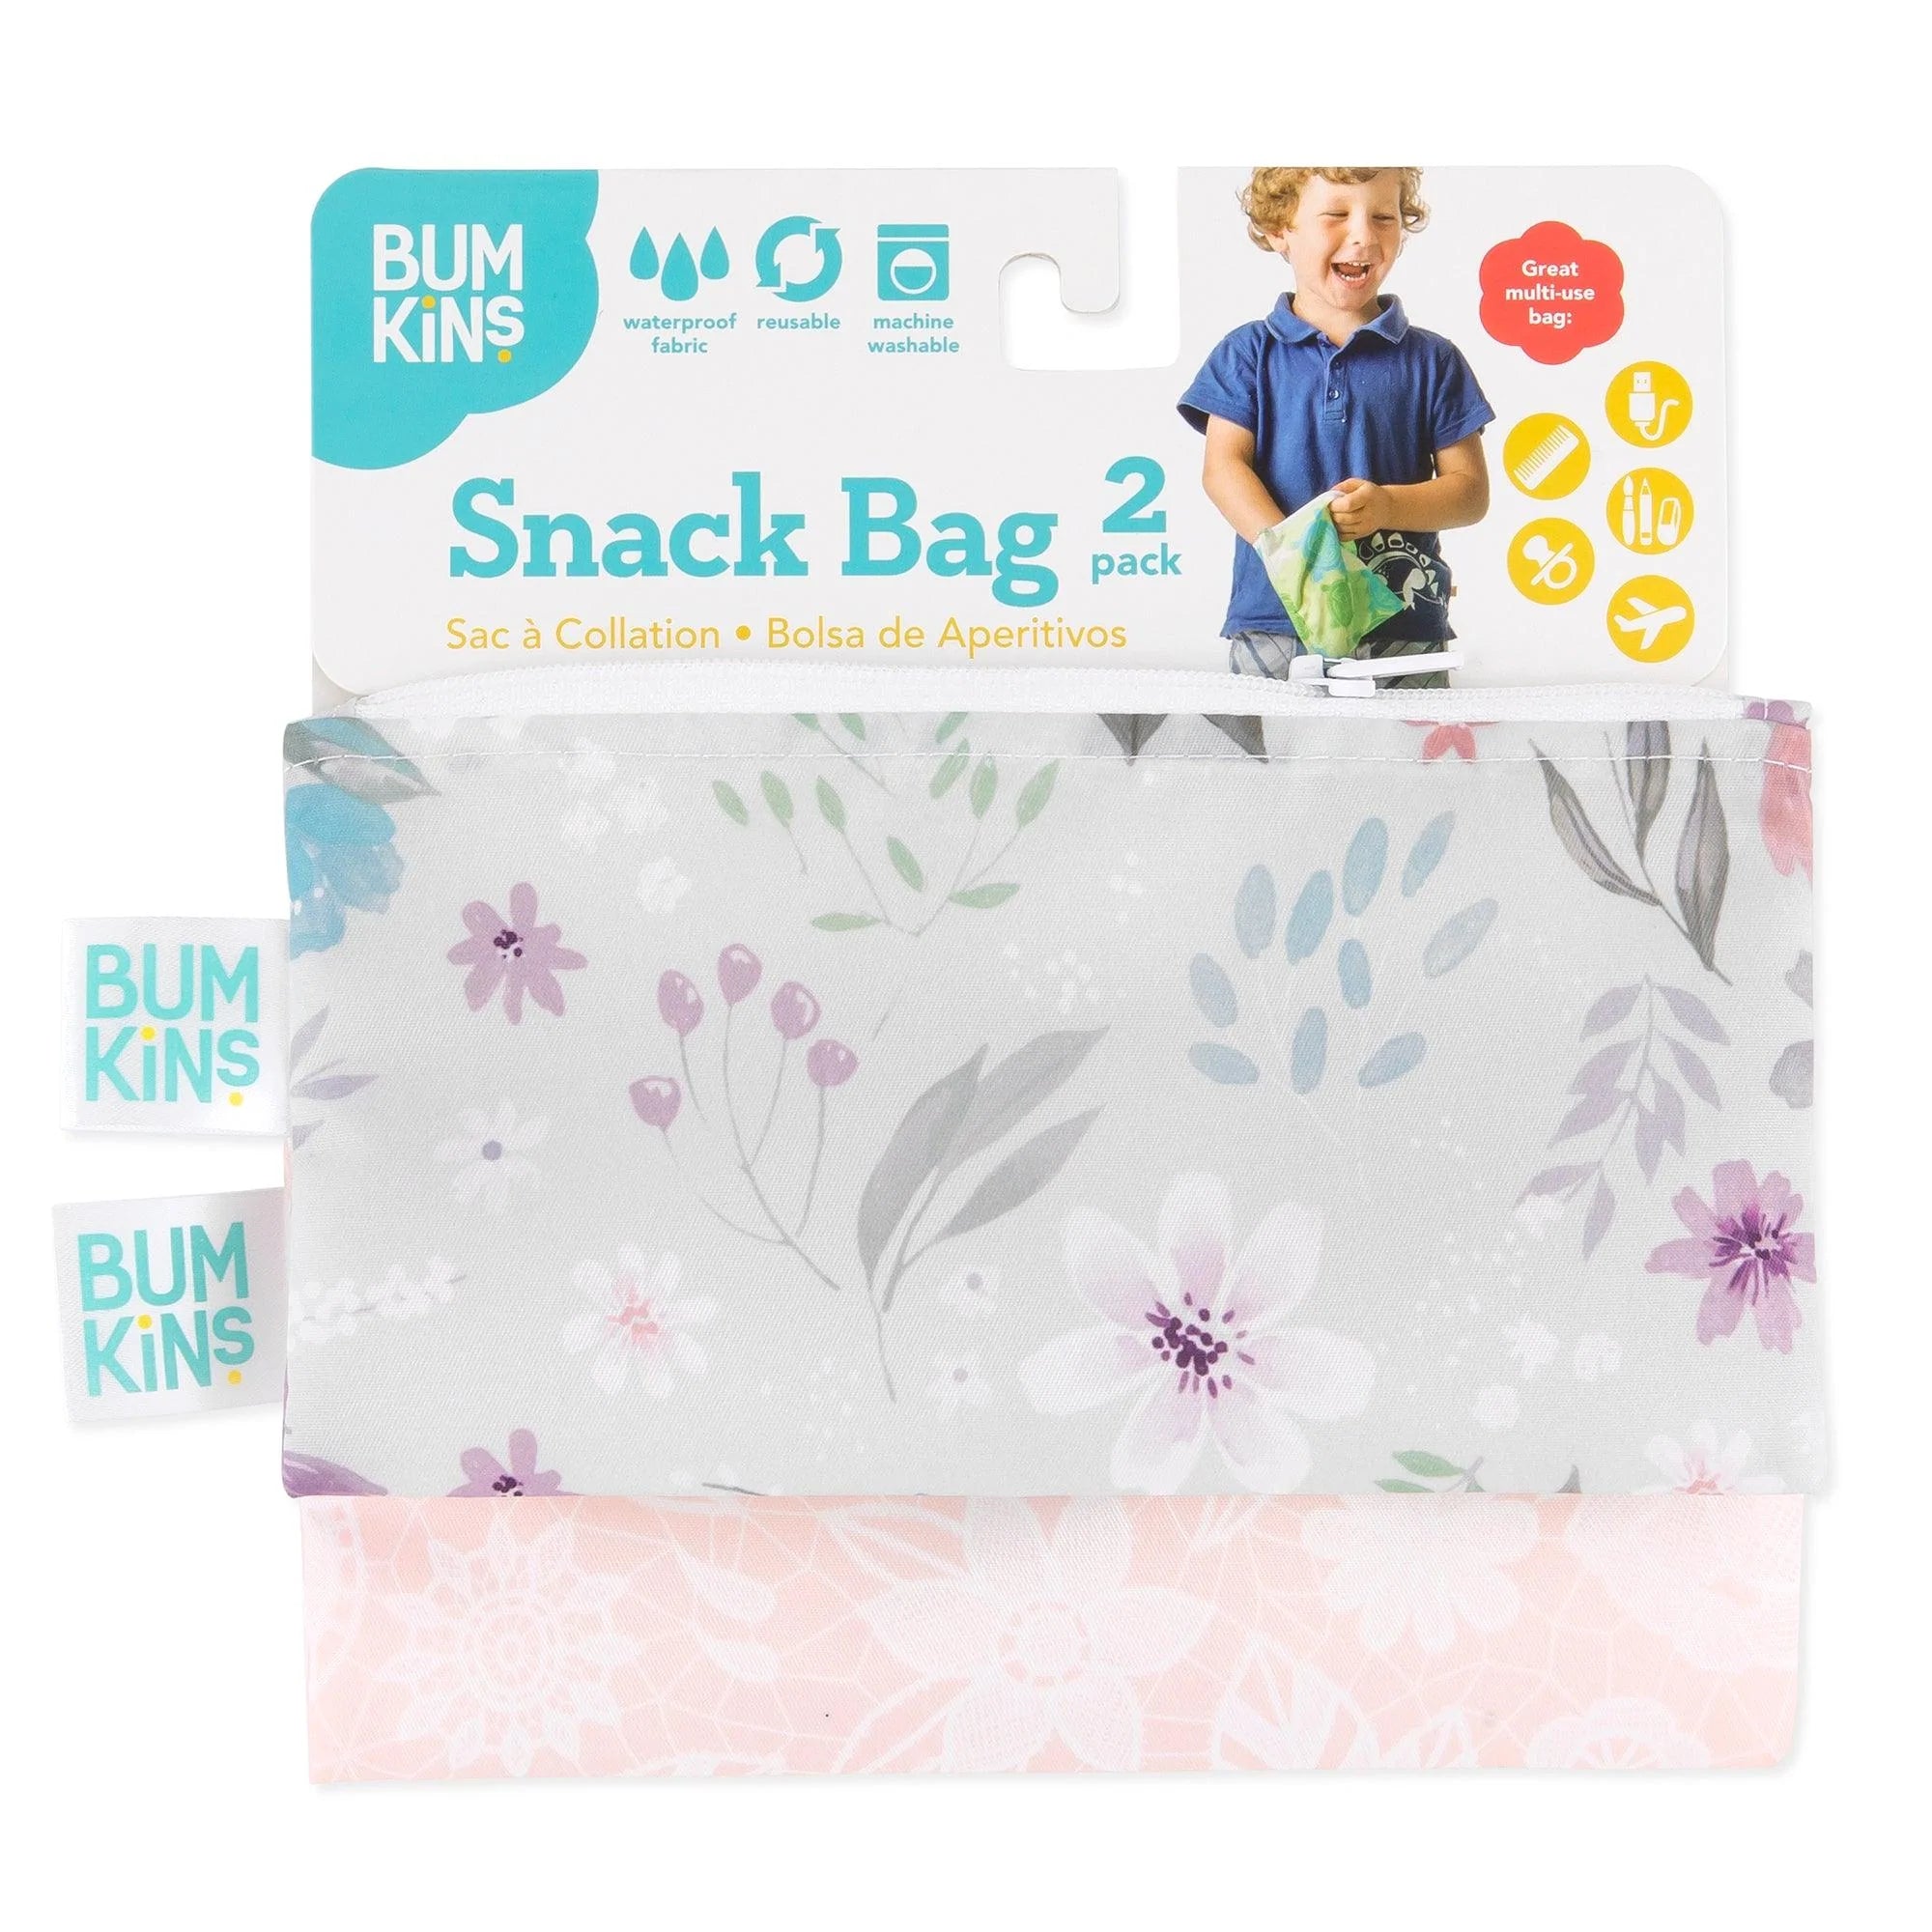 Reusable Snack Bag, Small 2-Pack: Floral & Lace - Bumkins